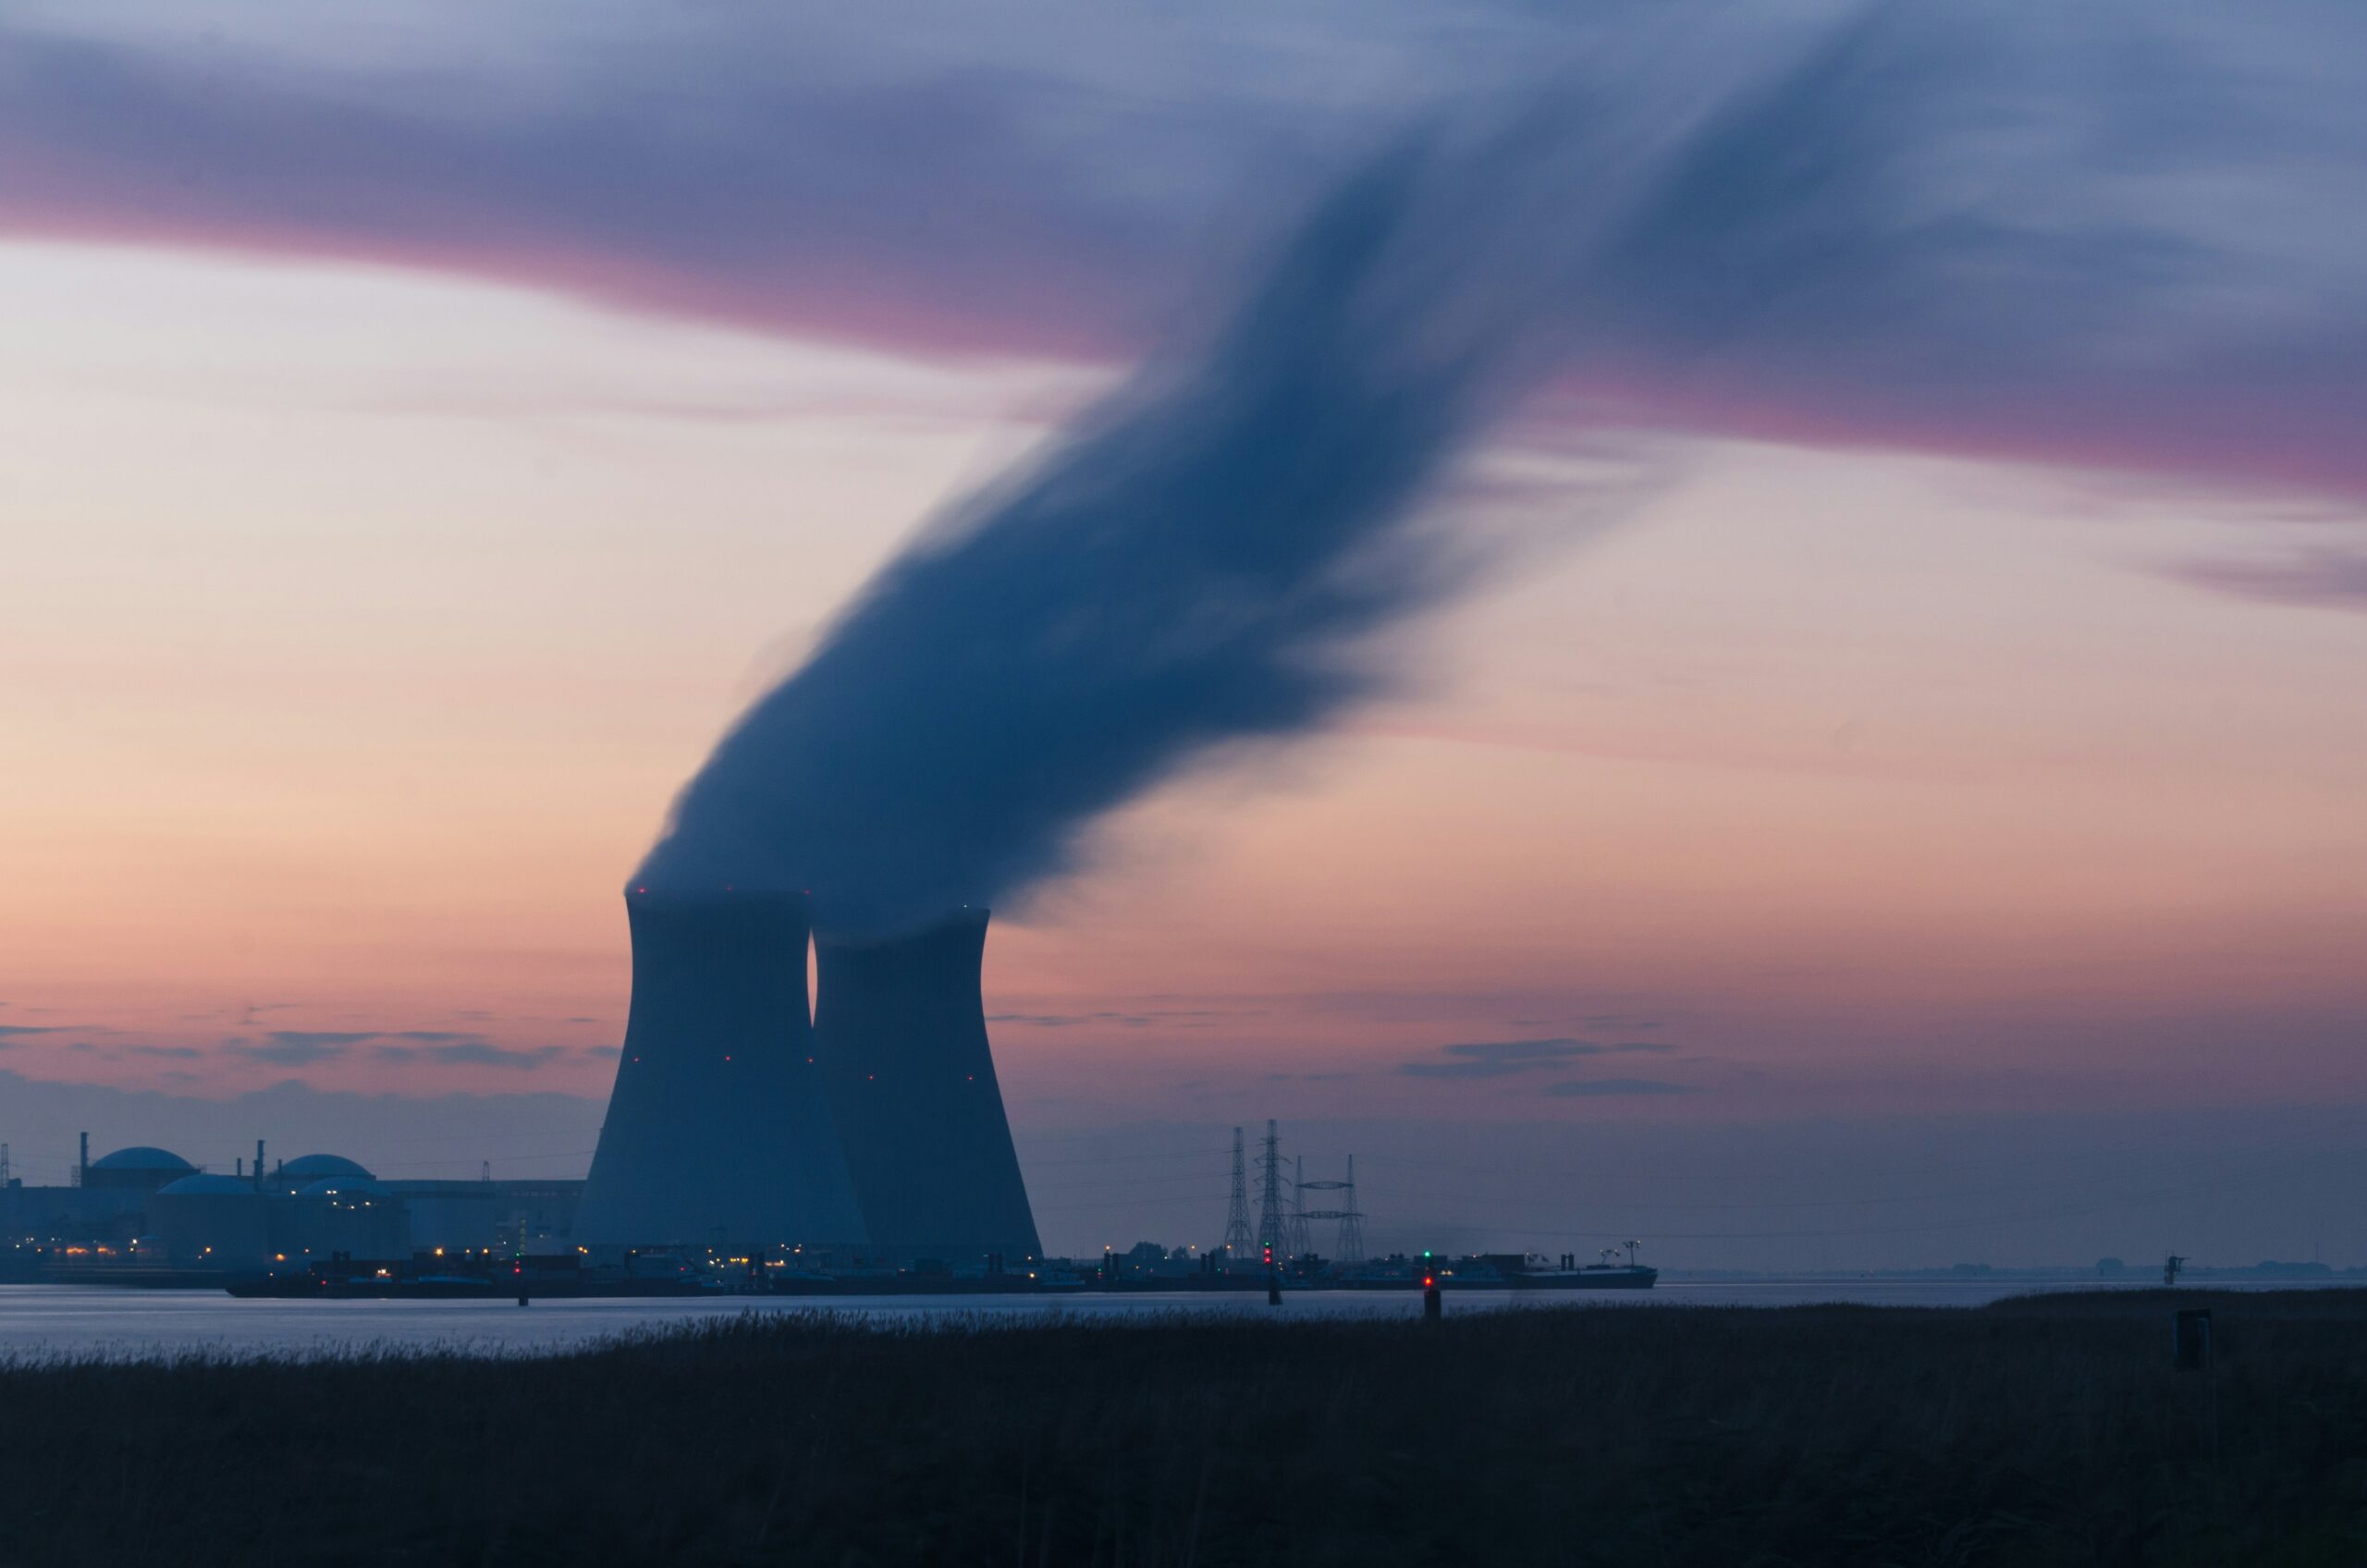 What Should I Do If There Is A Nuclear Accident?